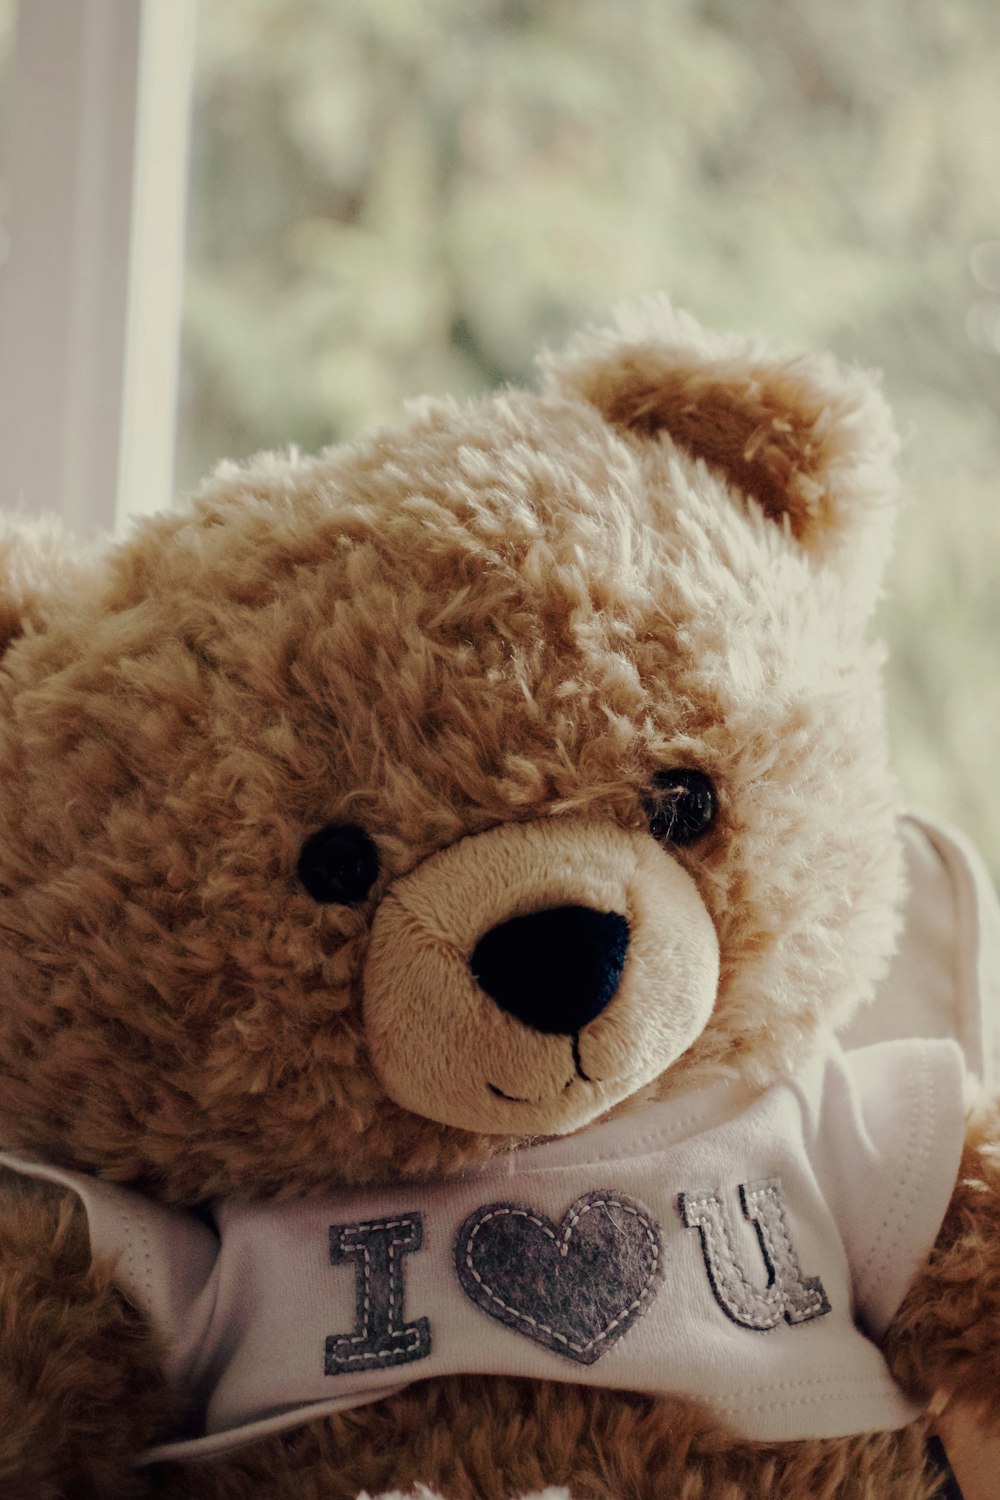 “A Stunning Compilation of Full 4K Cute Teddy Bear Pictures: Over 999 Charming Images”